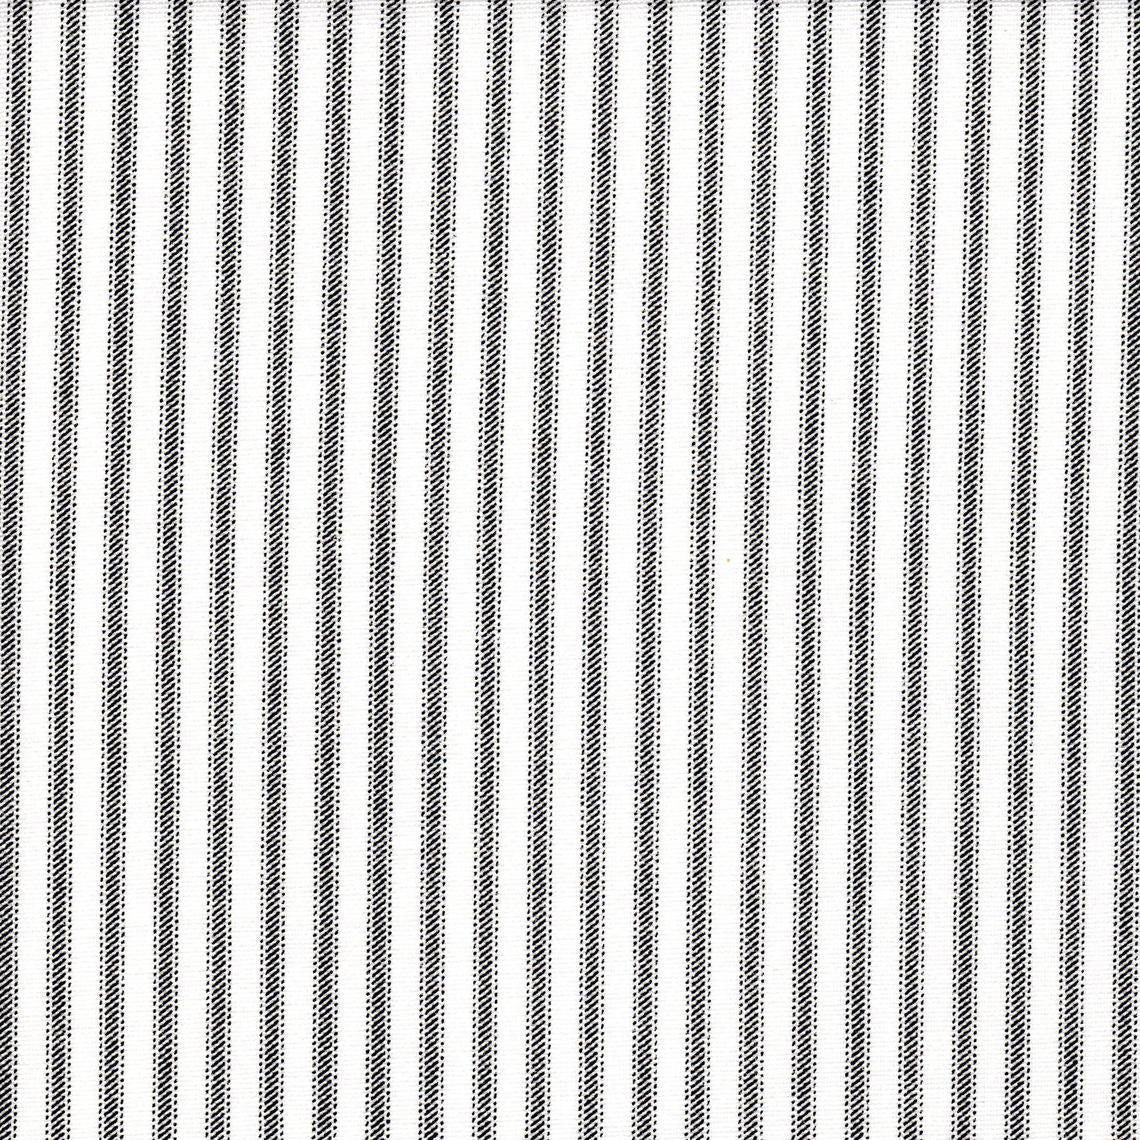 gathered bedskirt in classic black ticking stripe on white